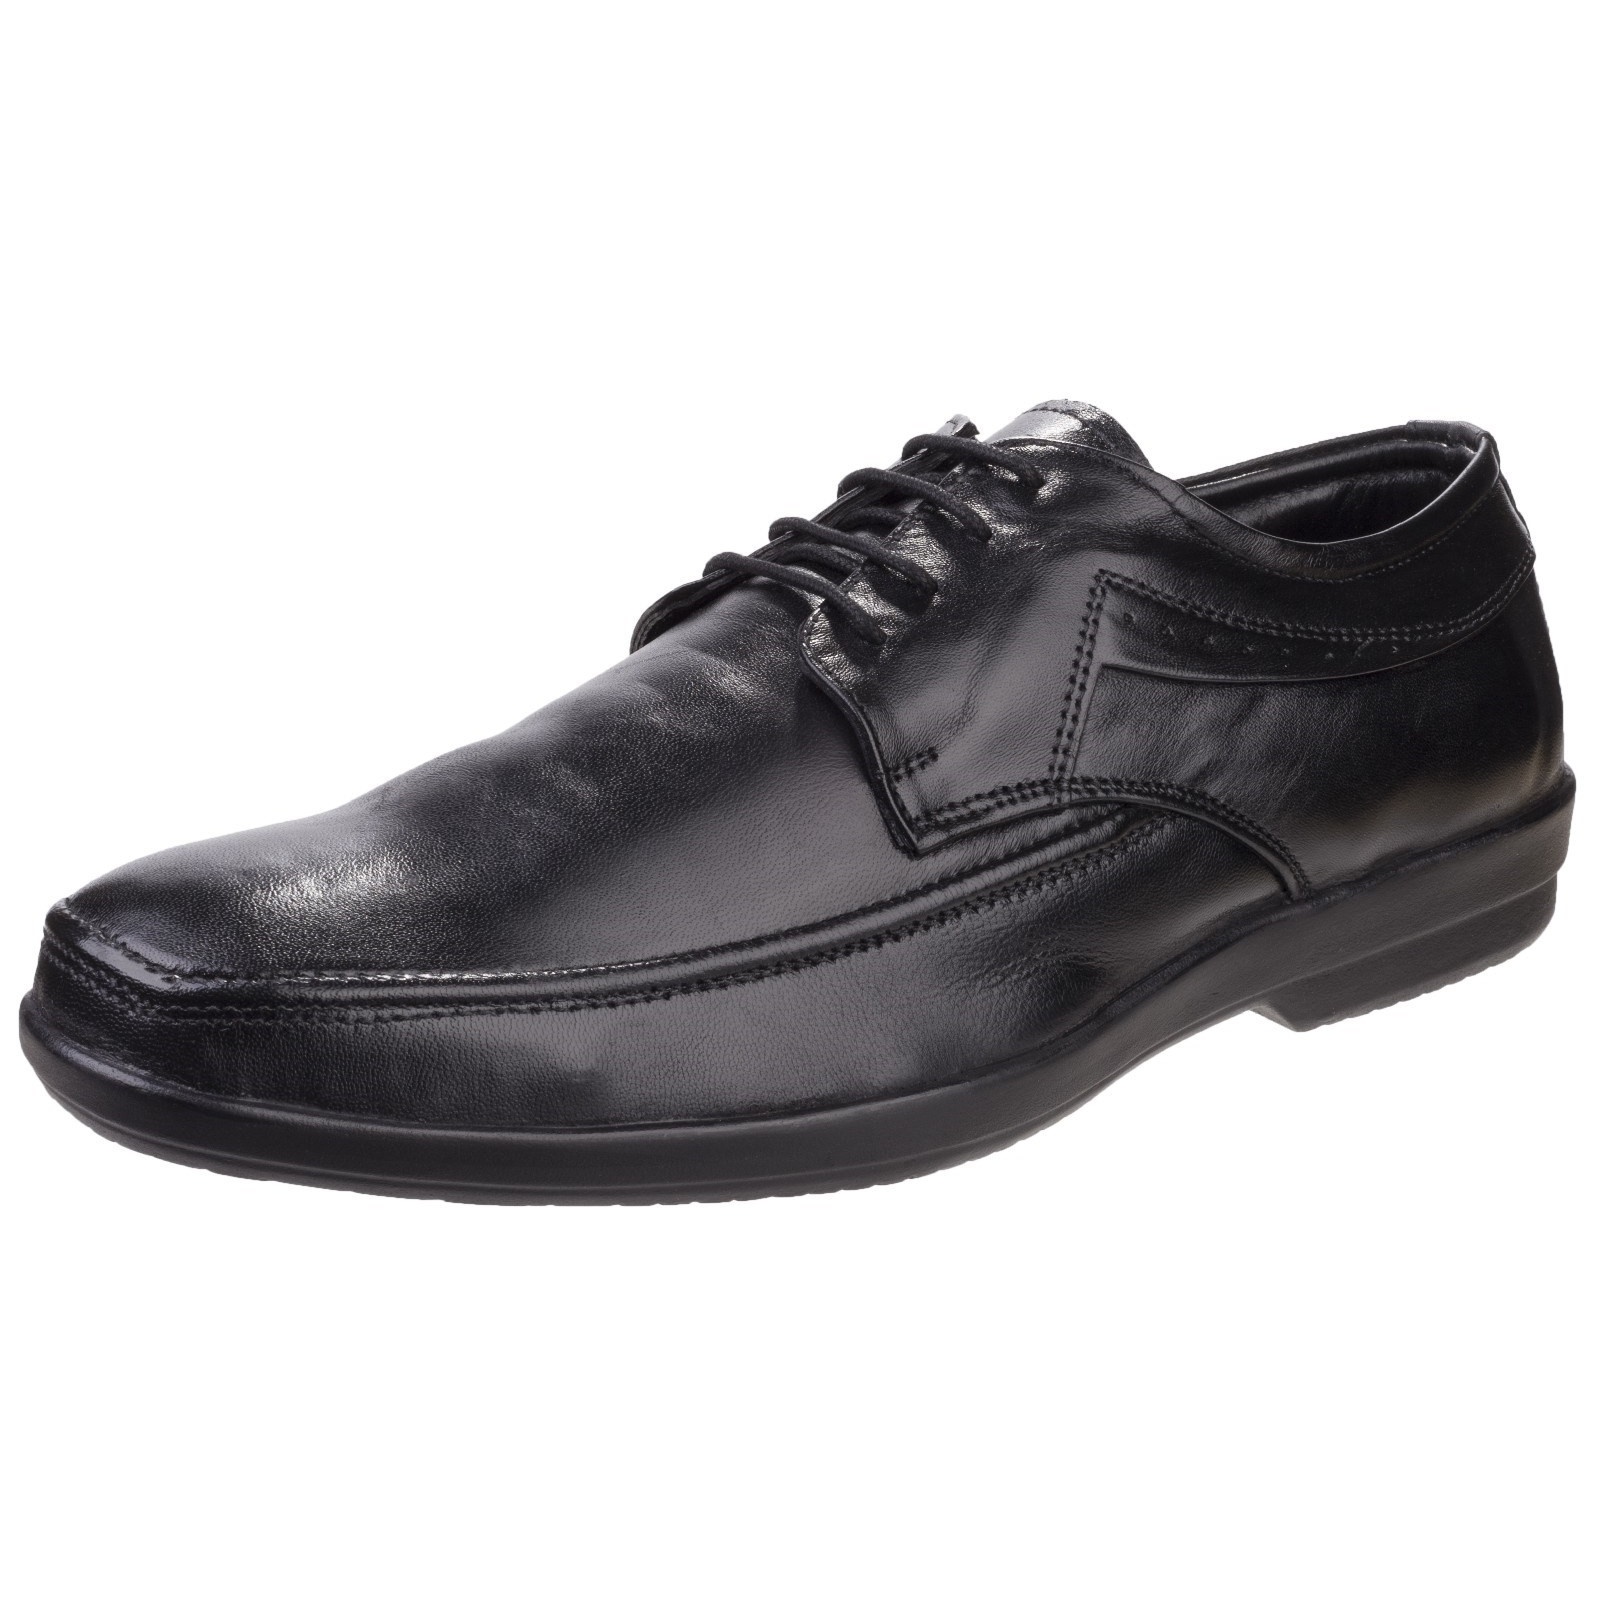 Fleet & Foster Mens Dave Apron Toe Oxford Formal Shoes - image 4 of 6